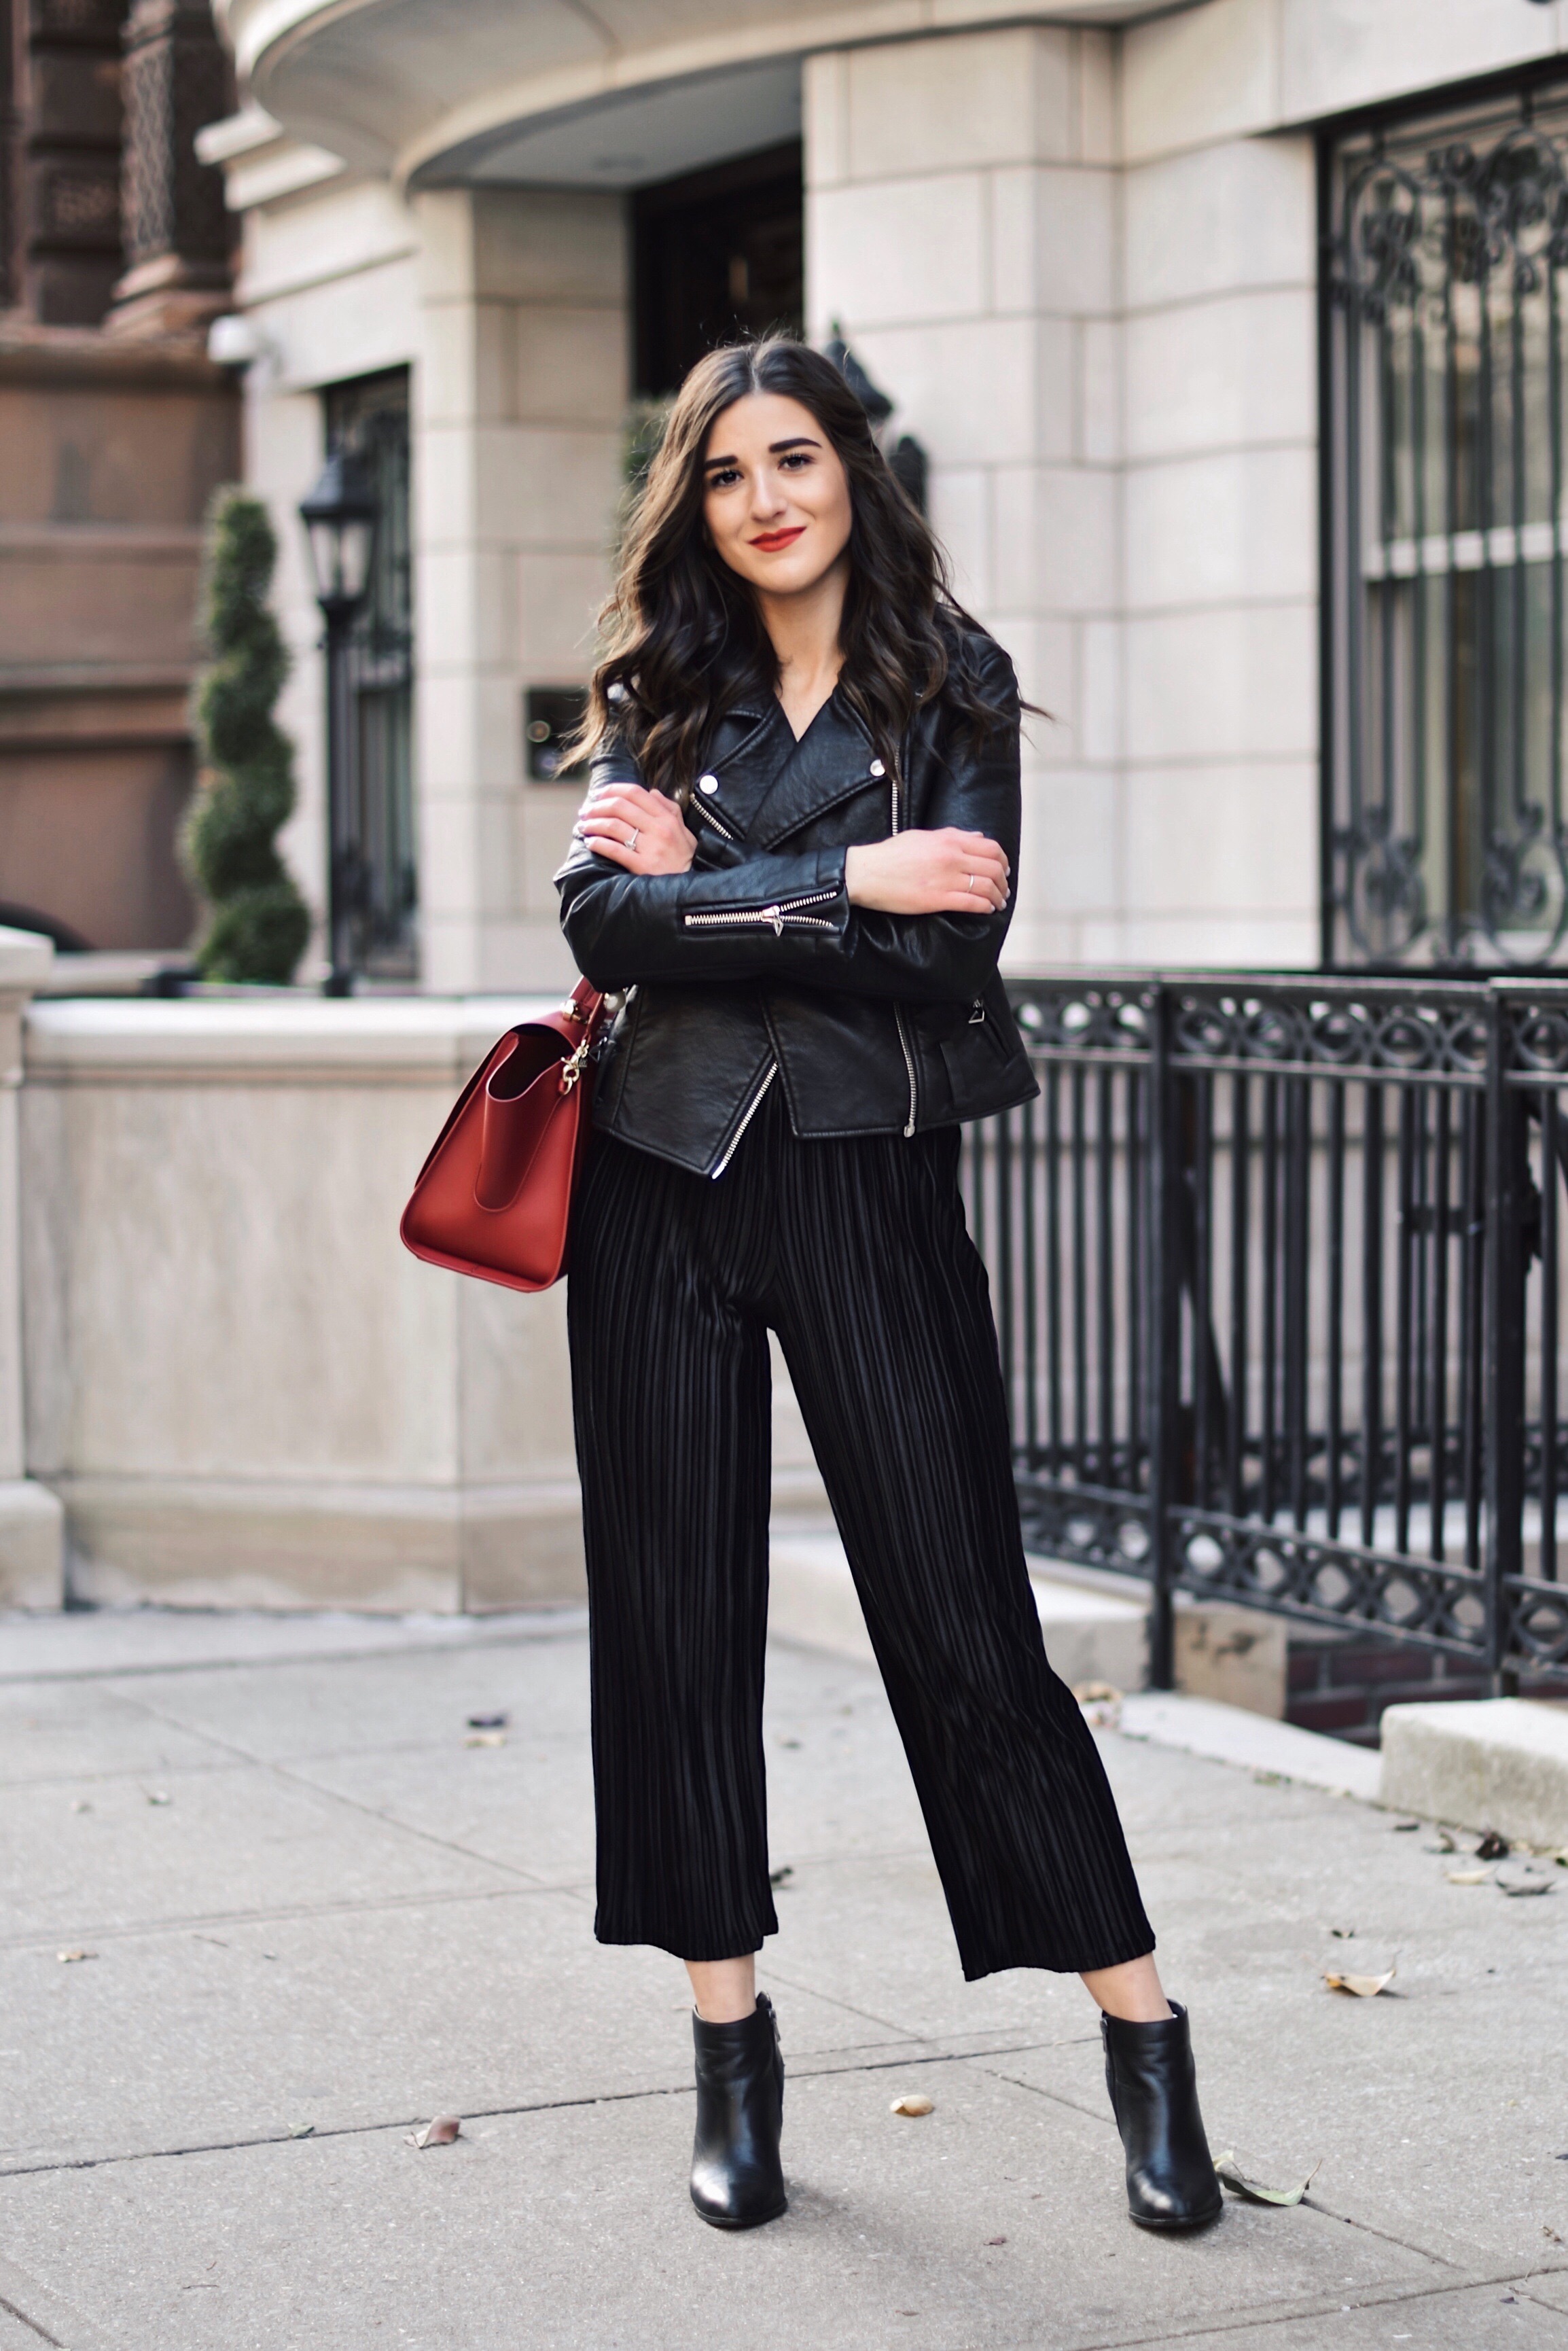 The Secret To Beating The Instagram Algorithm Black Velvet Set Leather Jacket Esther Santer Fashion Blog NYC Street Style Blogger Outfit OOTD Trendy All Black Monochrome Red Purse Zac Posen Bag Collaboration  Booties Winter Fall Look Shopping Wear Buy.jpg